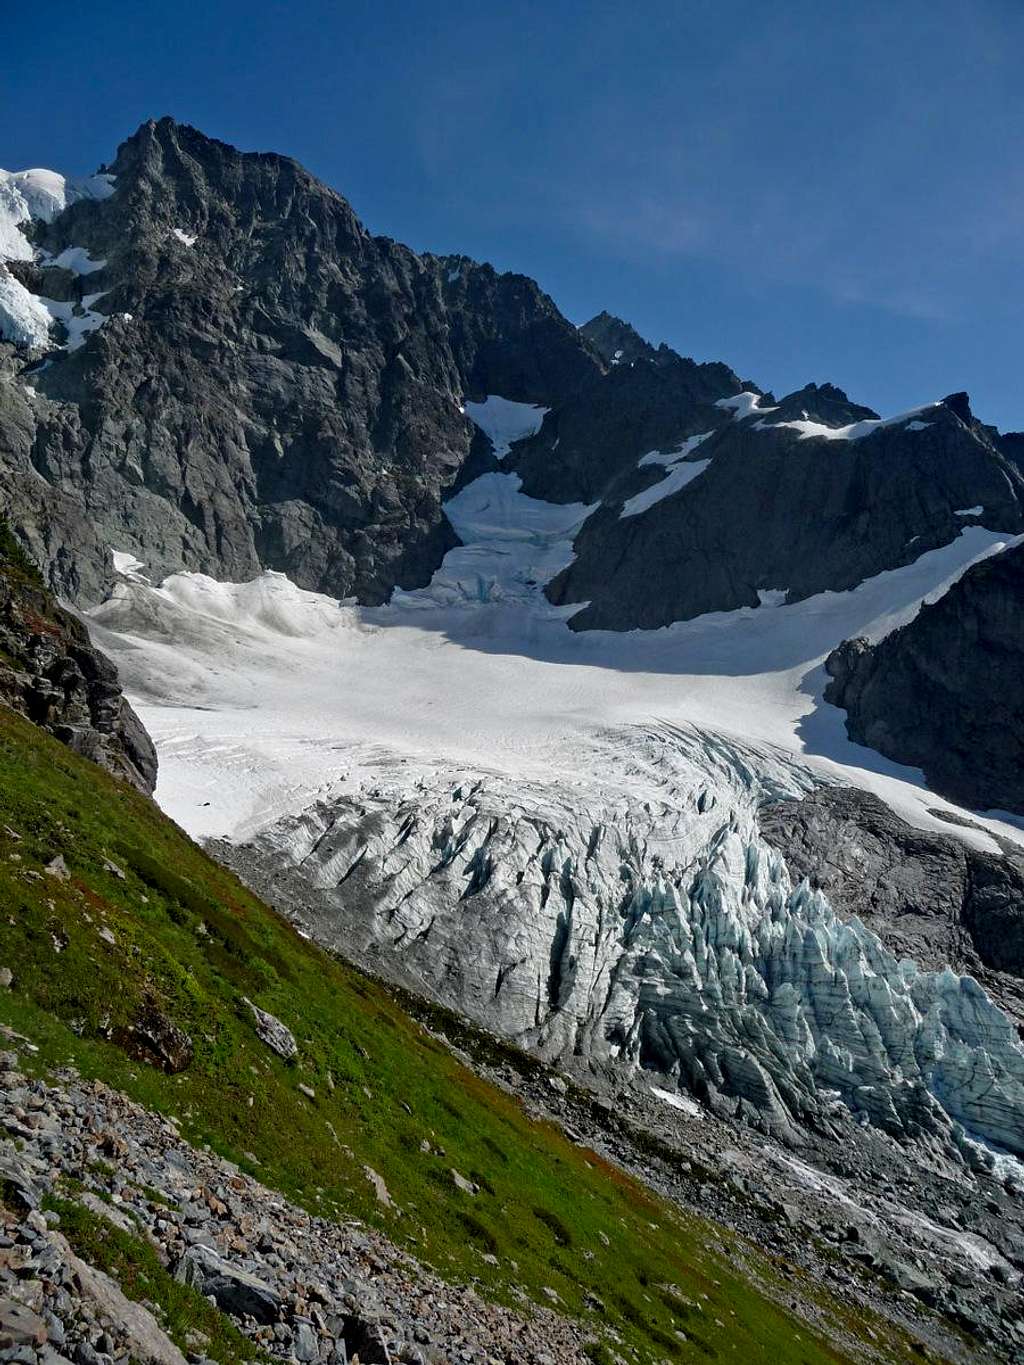 Lower Curtis Glacier from the Grassy Slopes